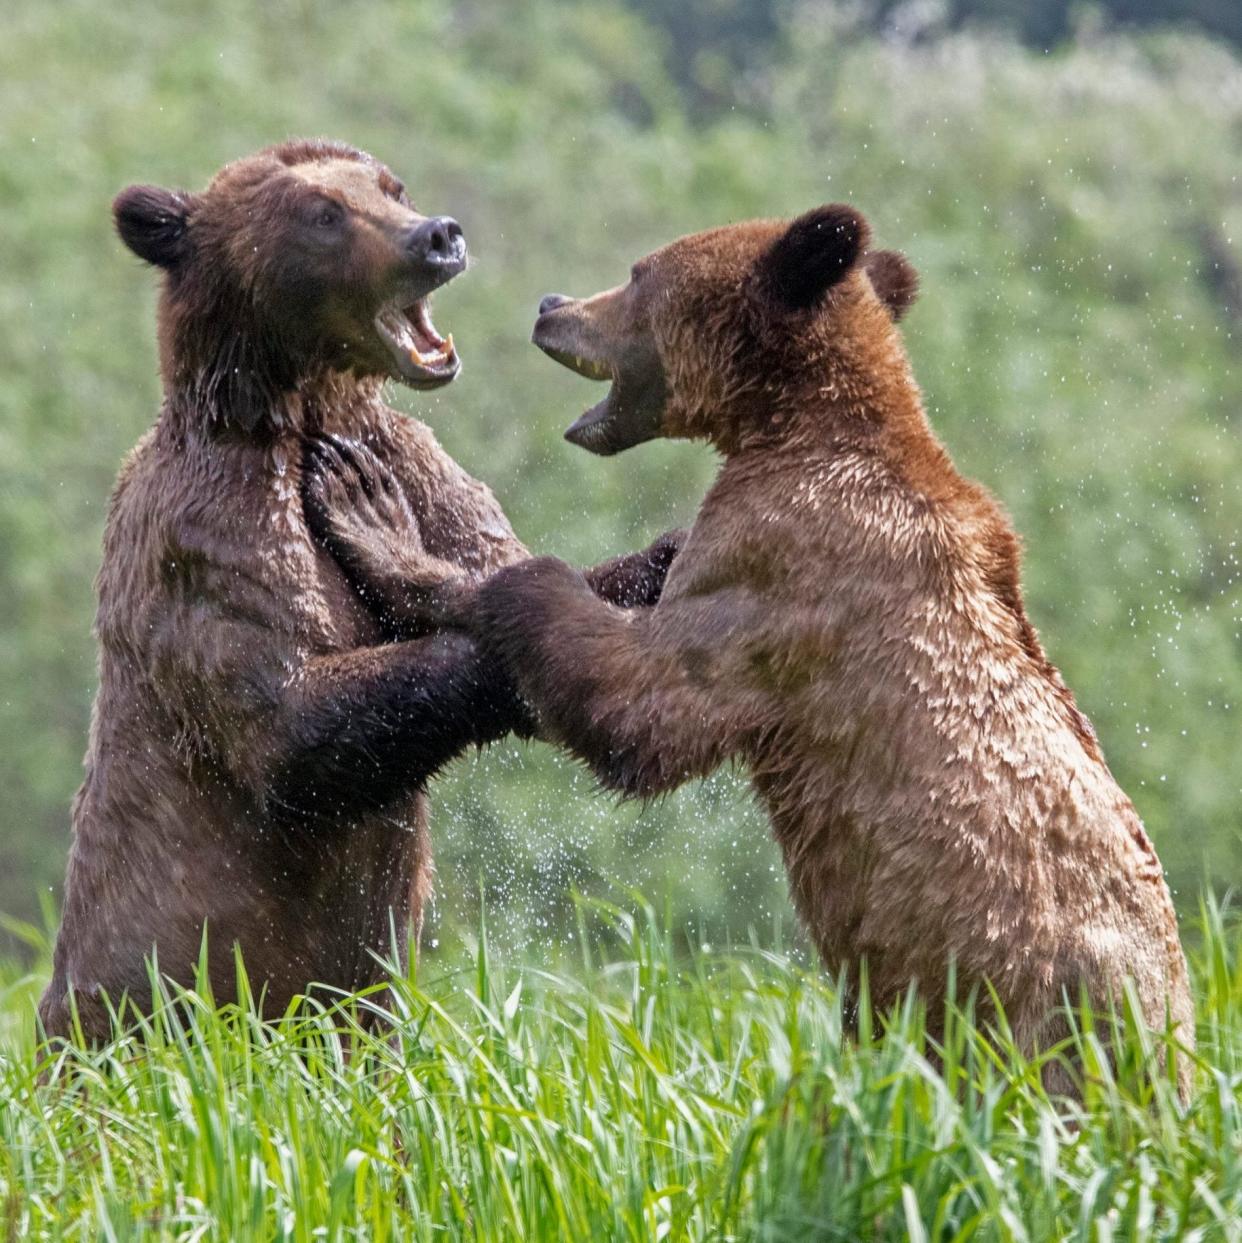 Young bears play fighting in Canada. - Danny Sullivan/Solent News & Photo Agency 